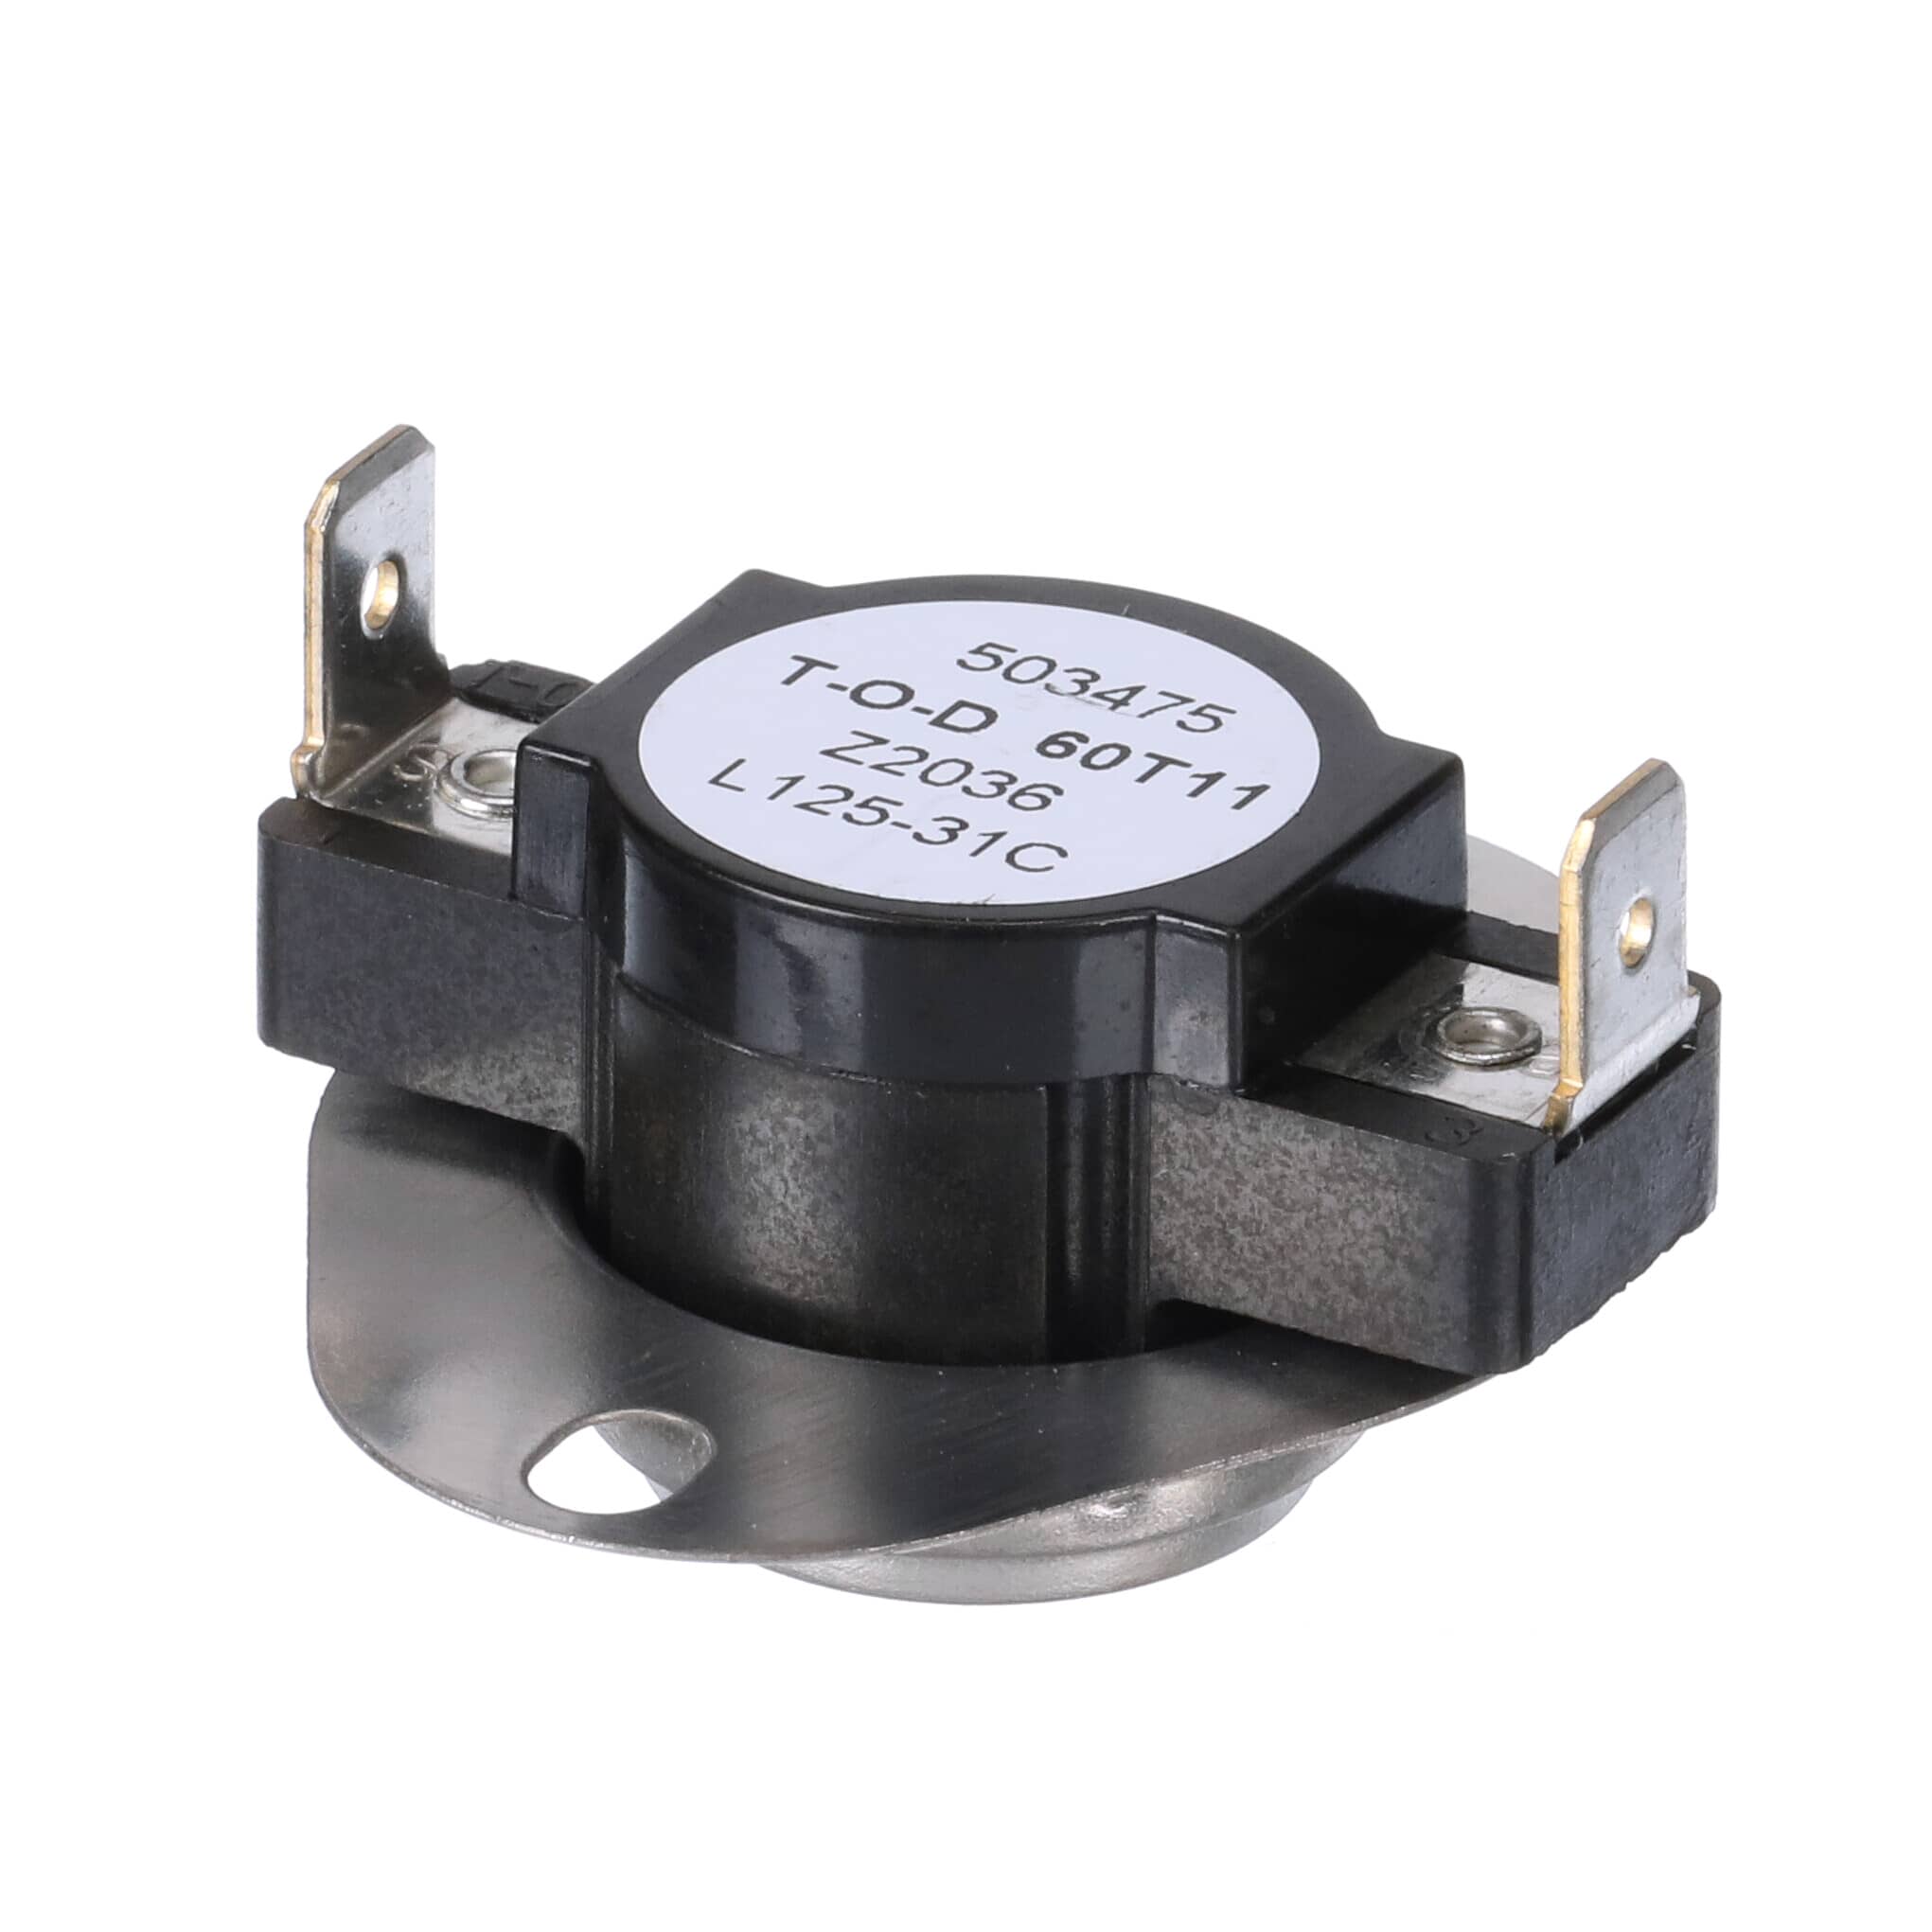 LG 6931EL3001E Dryer High Limit Thermostat Switch Assembly